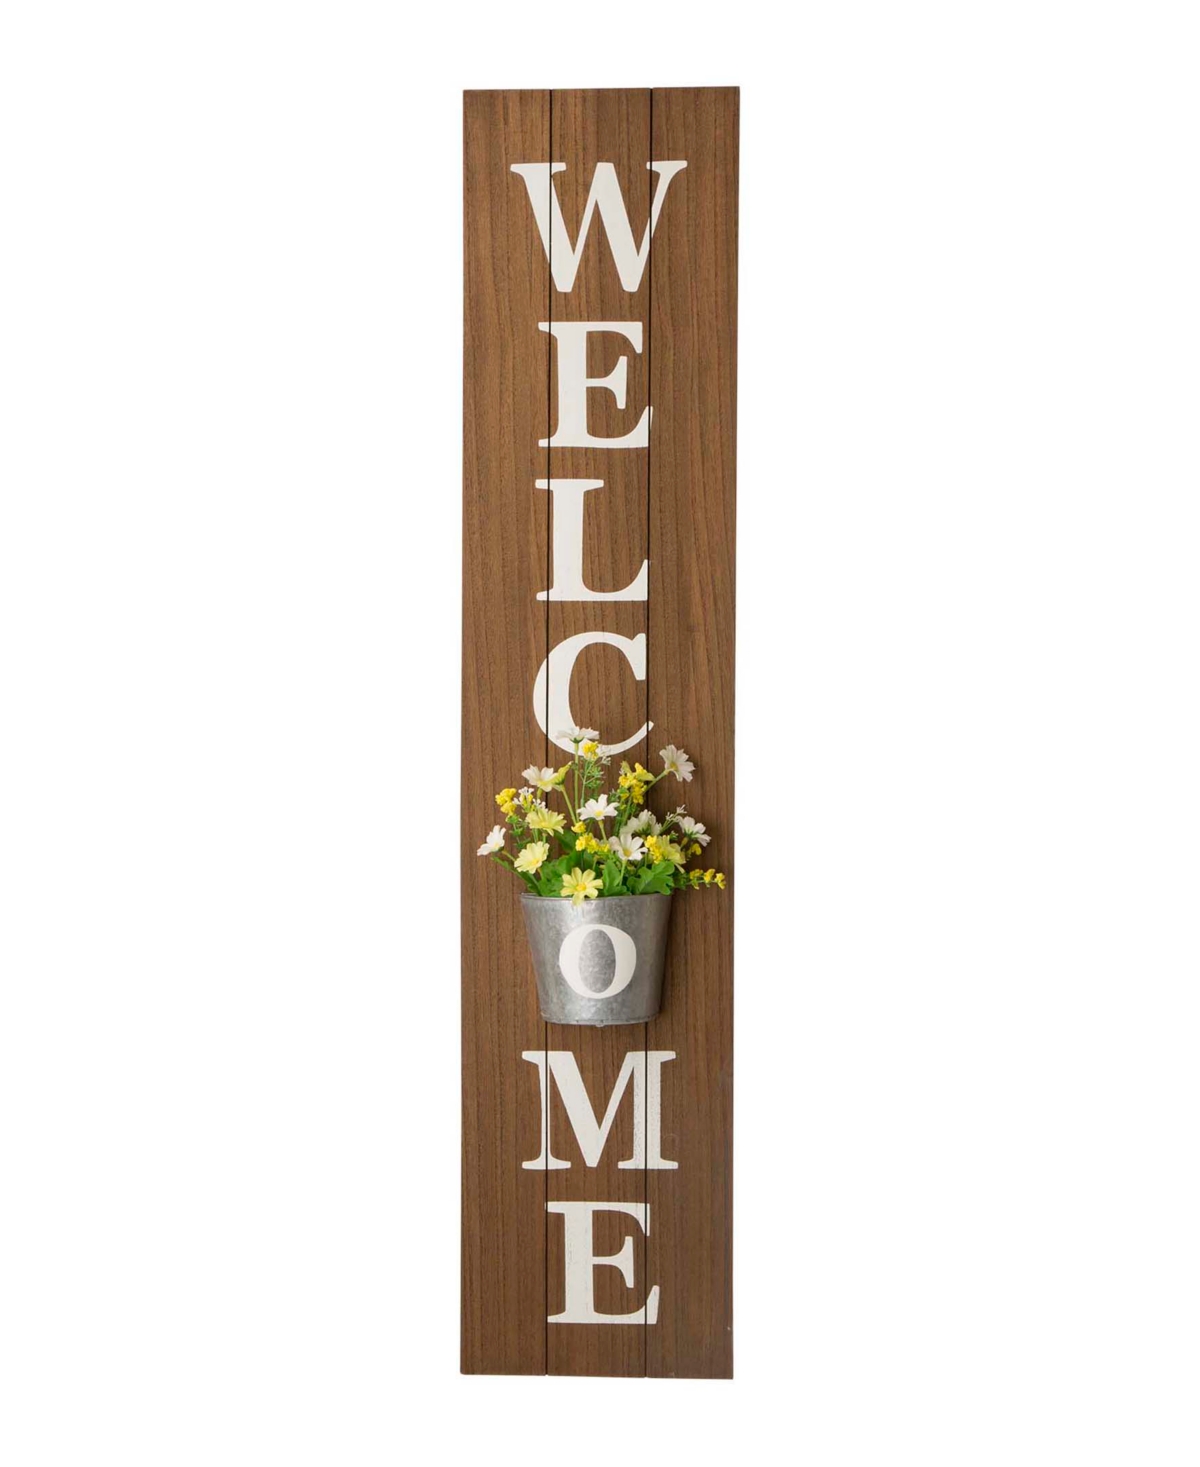 Glitzhome 42"h Wooden White Welcome Porch Sign With Metal Planter In Brown